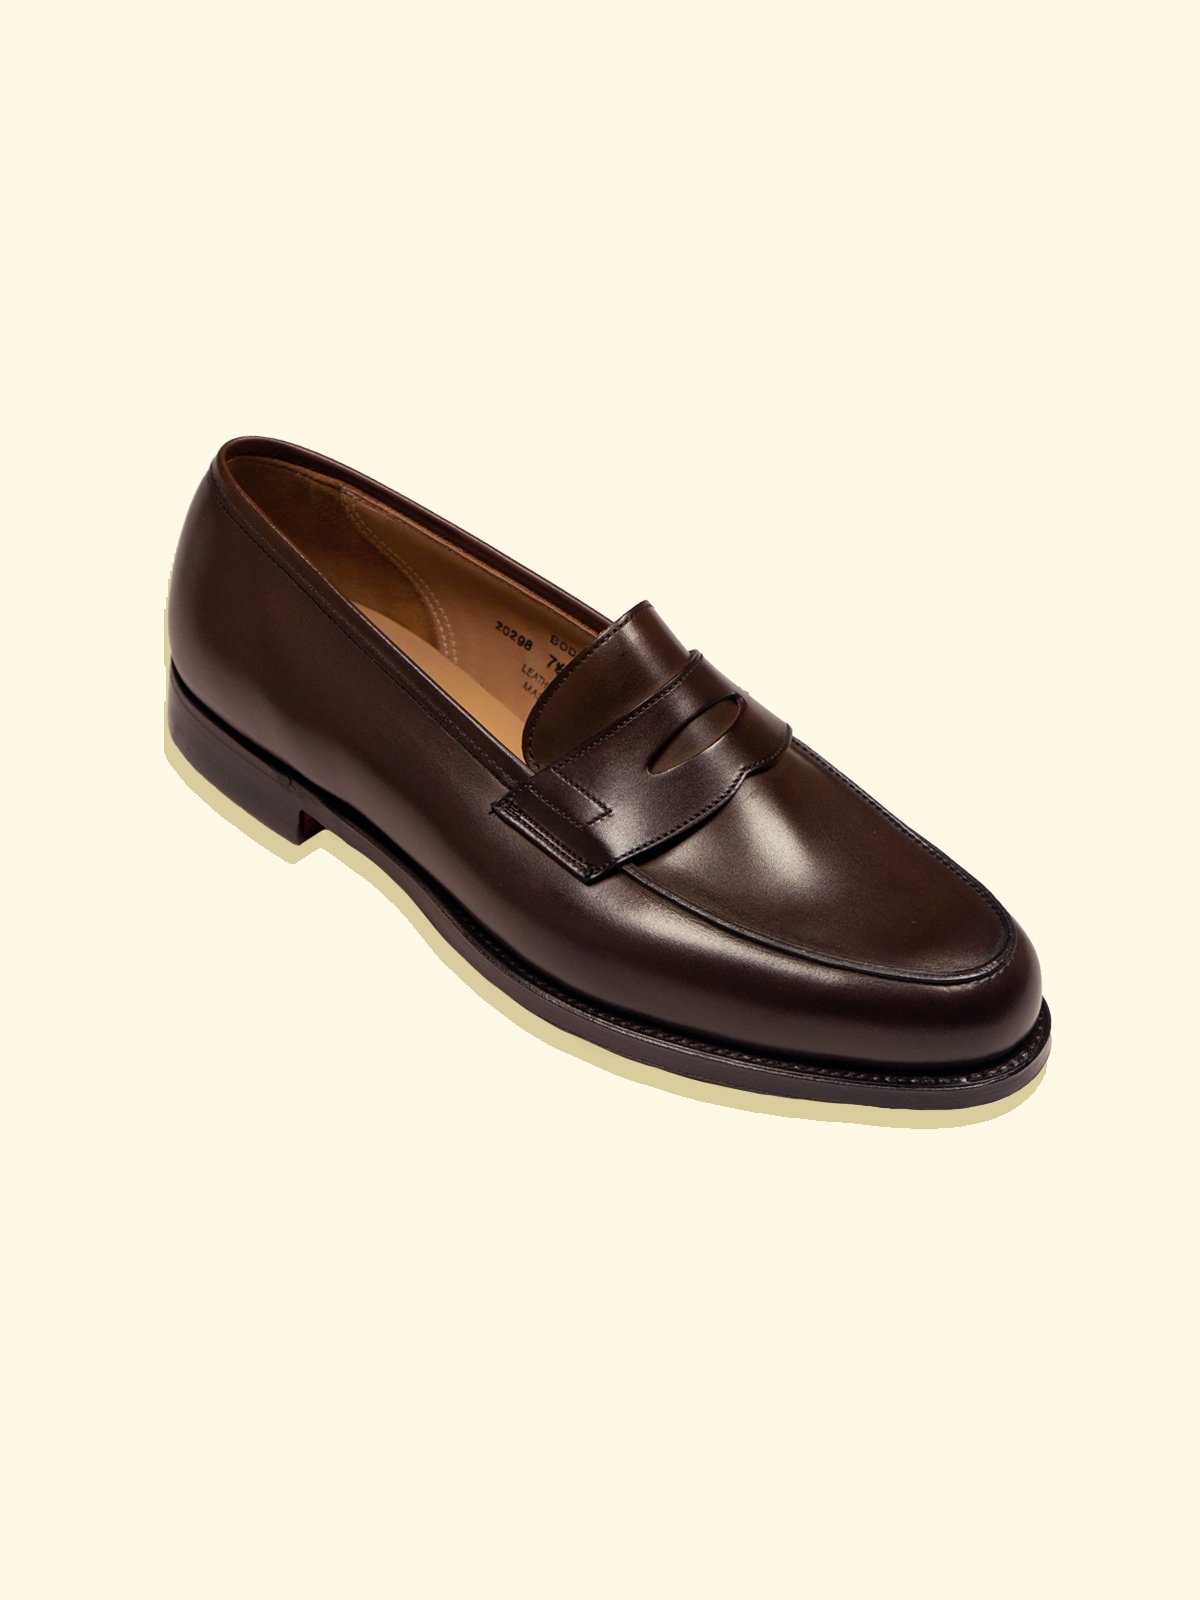 Bodley Penny Loafers by & Jones for The Anthology - Espresso Calf — The Anthology